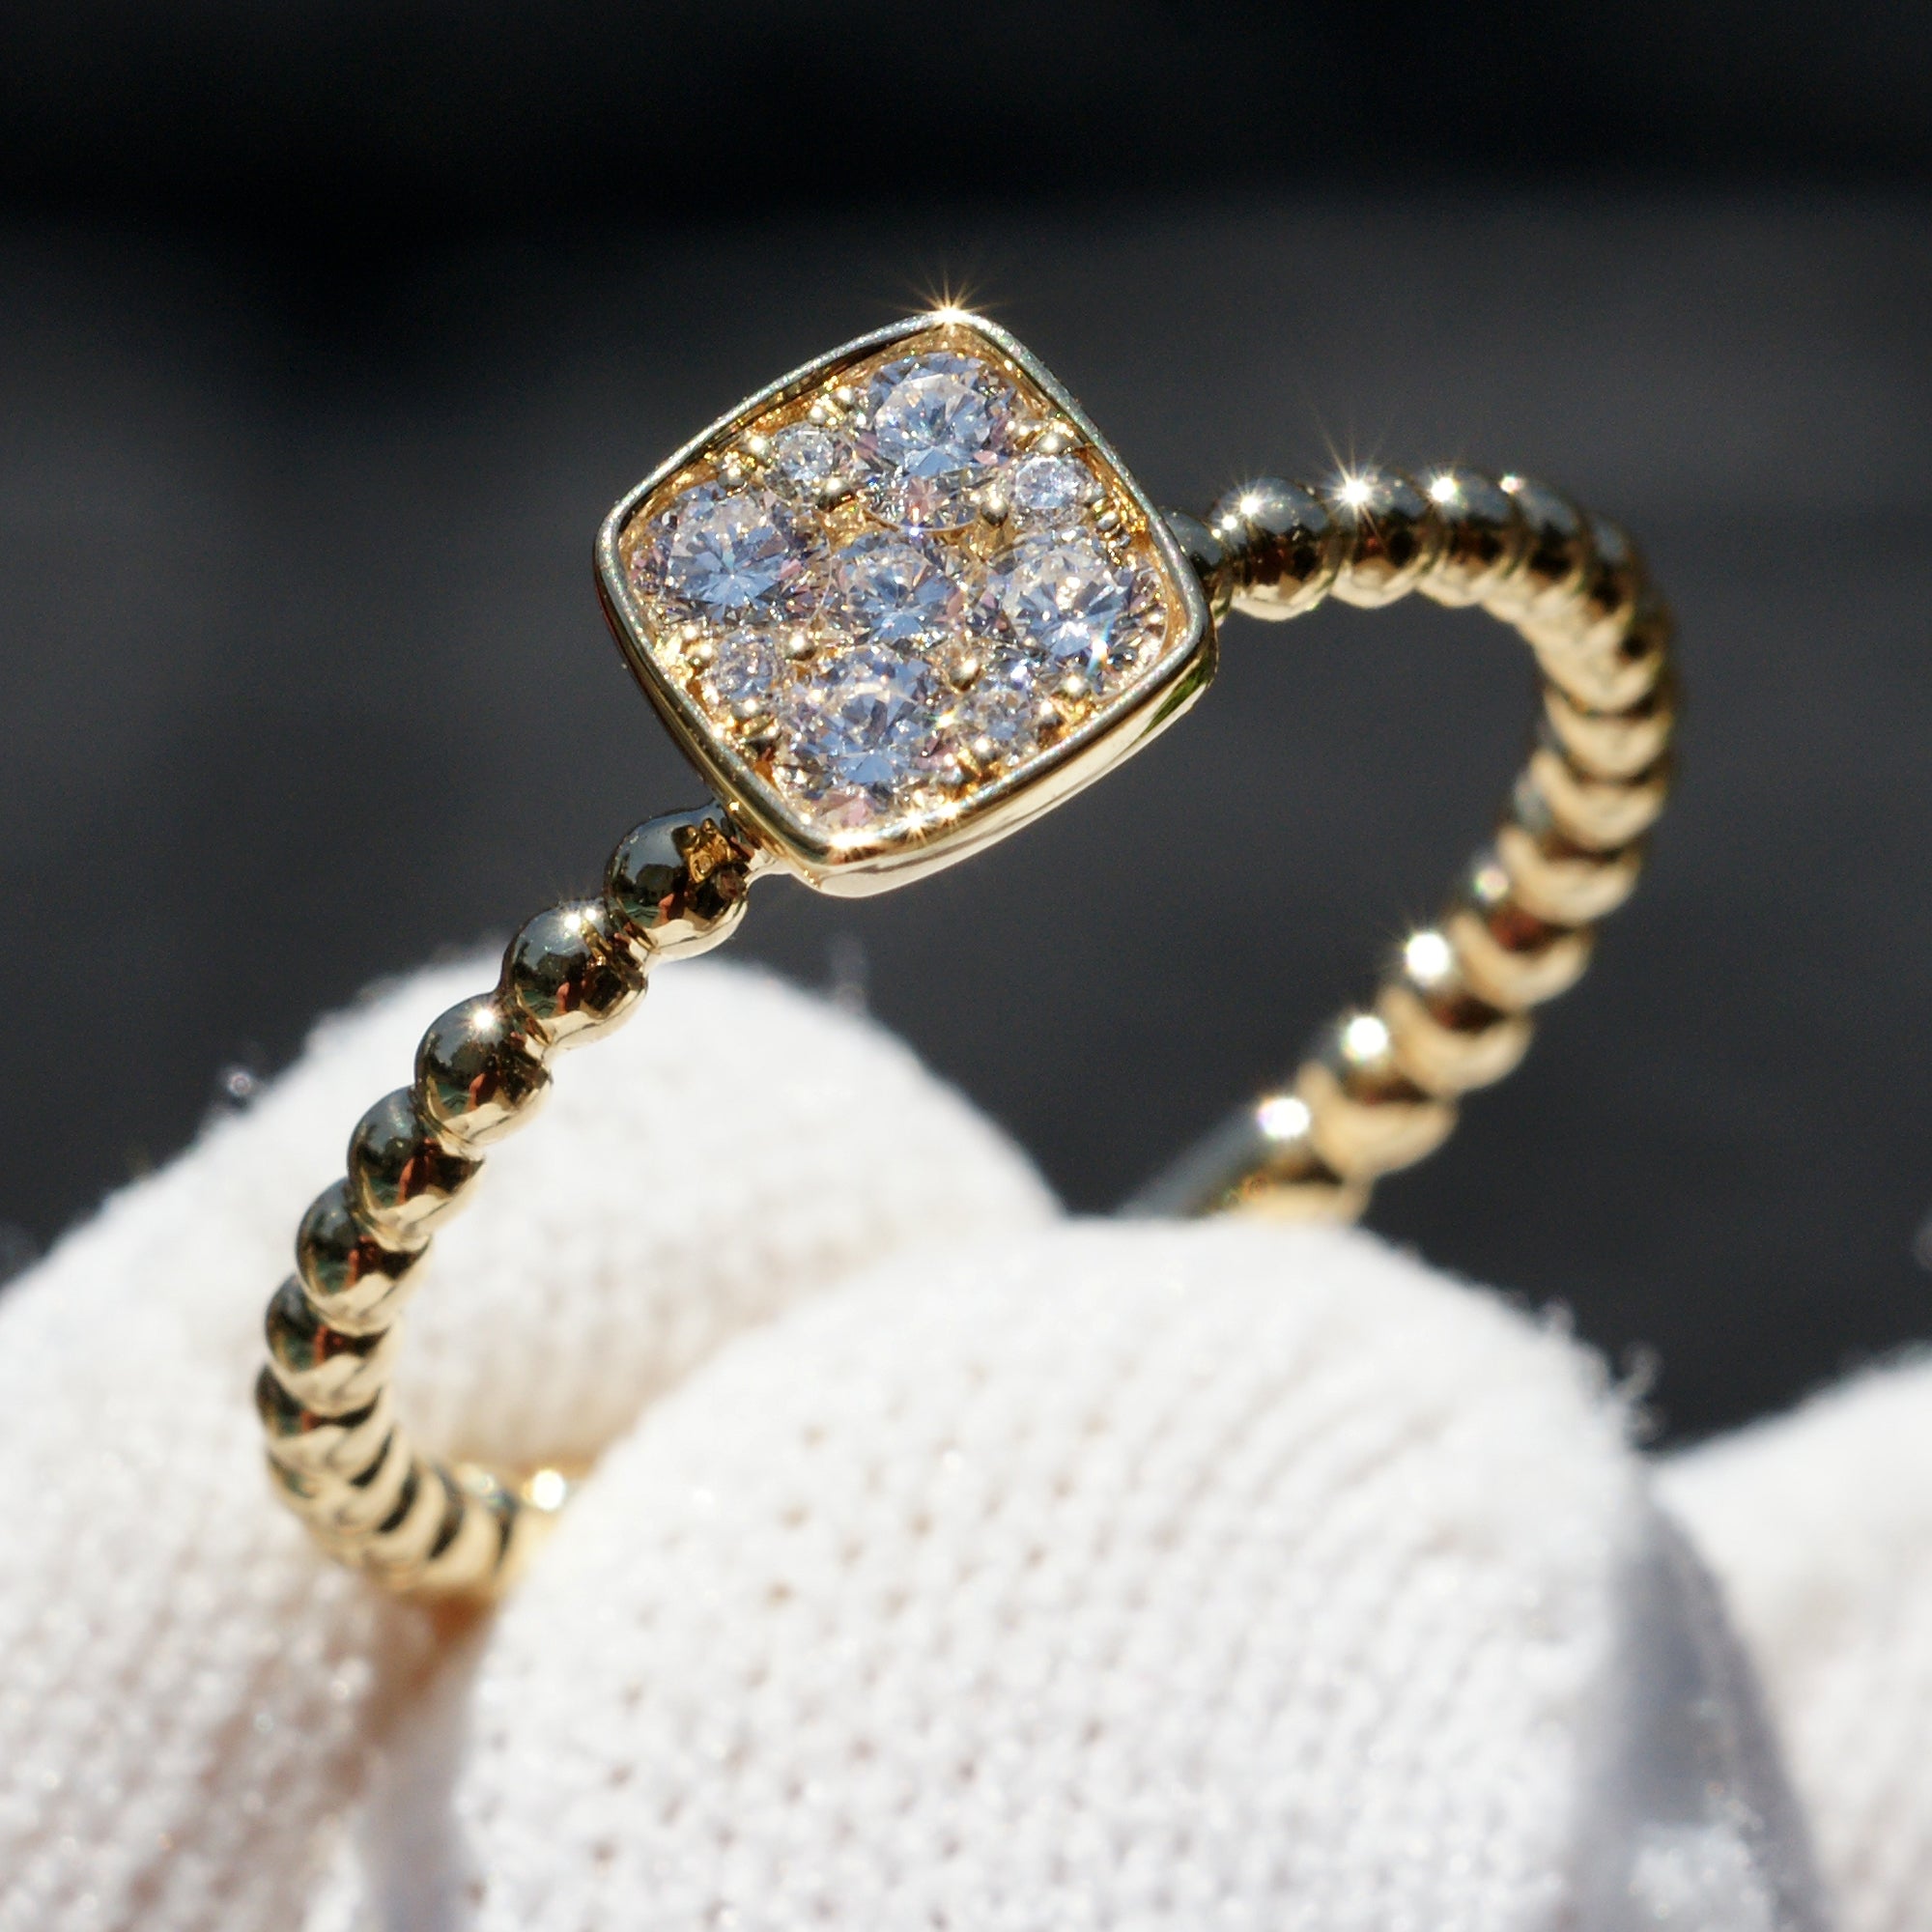 Square cushion cluster diamond solitaire with beaded yellow gold band